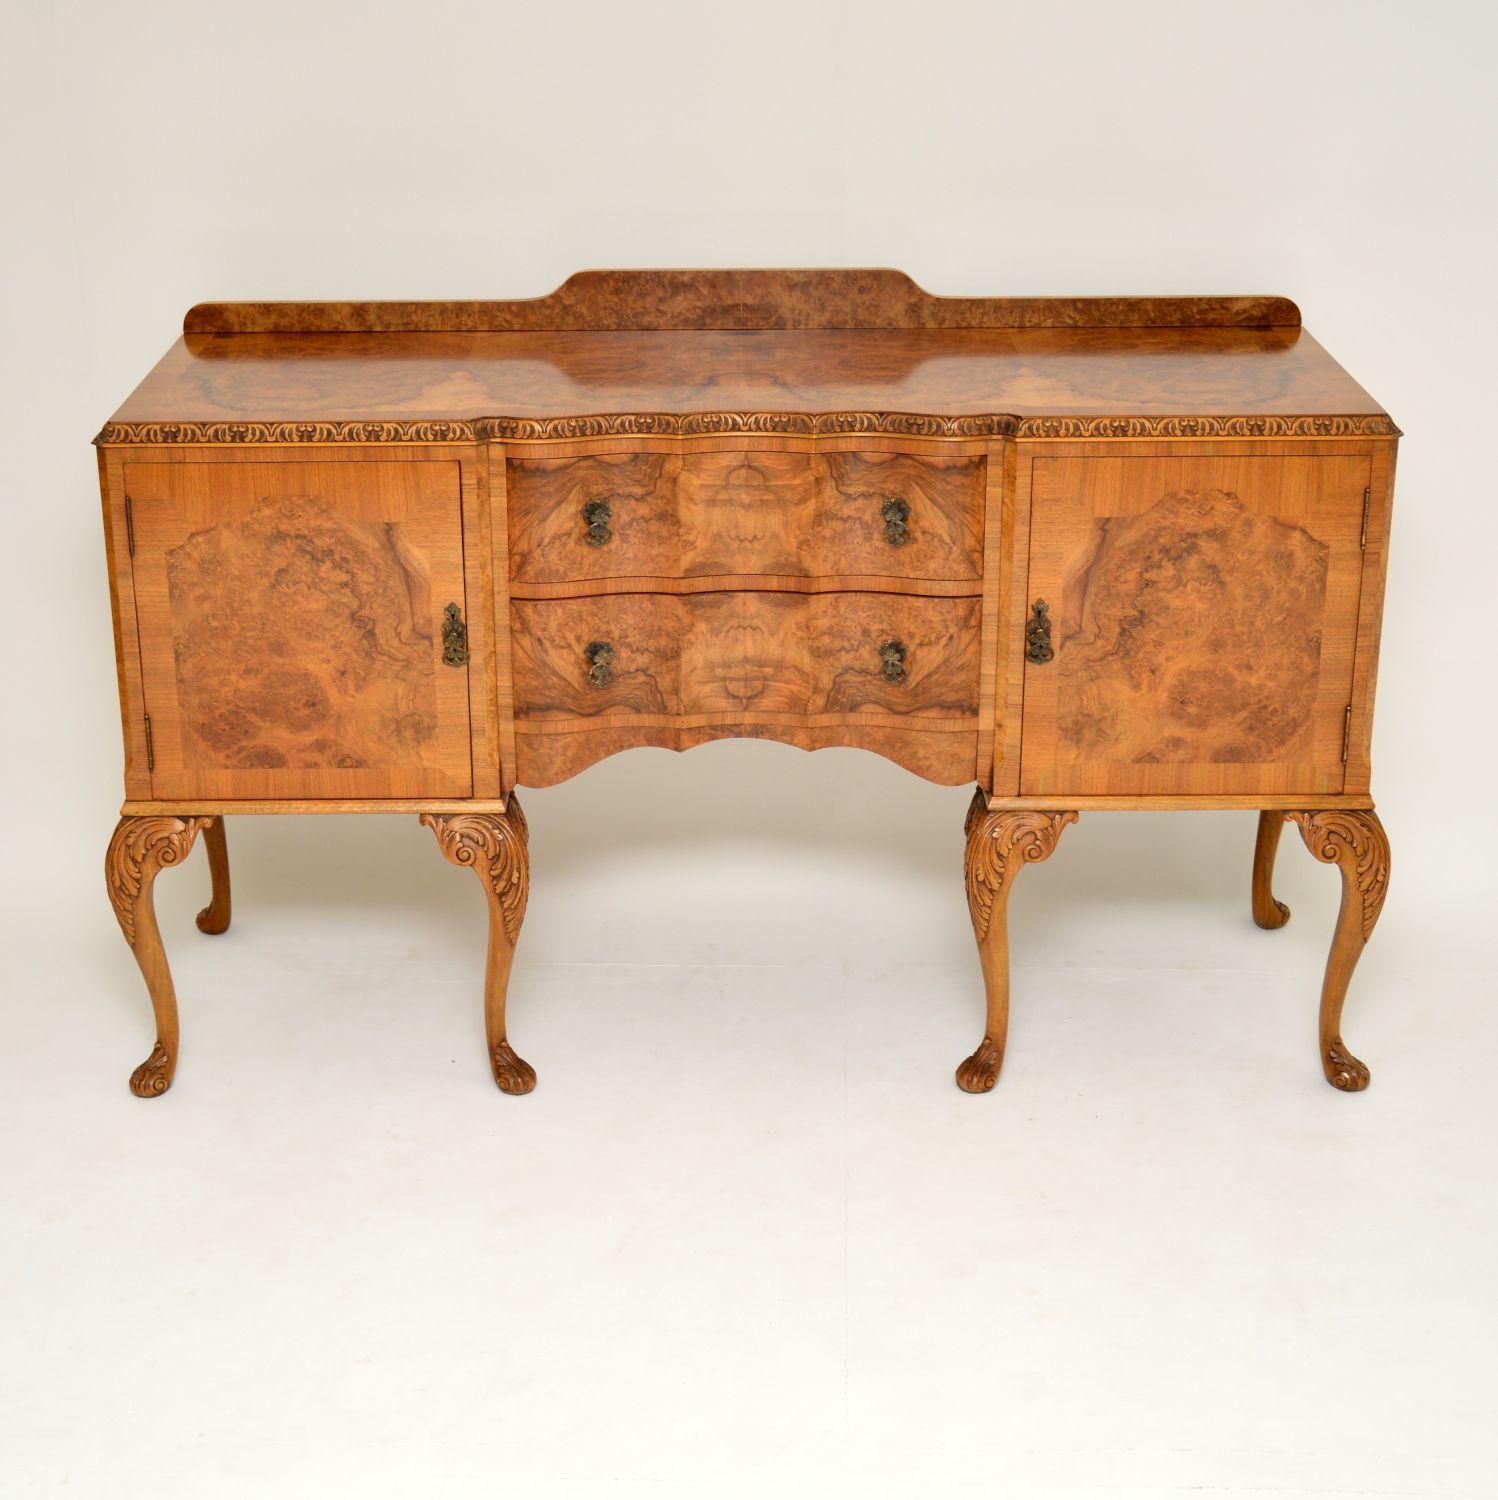 Fabulous quality Queen Anne style walnut sideboard made by H and L Epstein in the 1930s period. It’s in excellent condition and has just been French polished. It has a burr walnut back frieze and top with a cross banded edge. The cupboards have burr